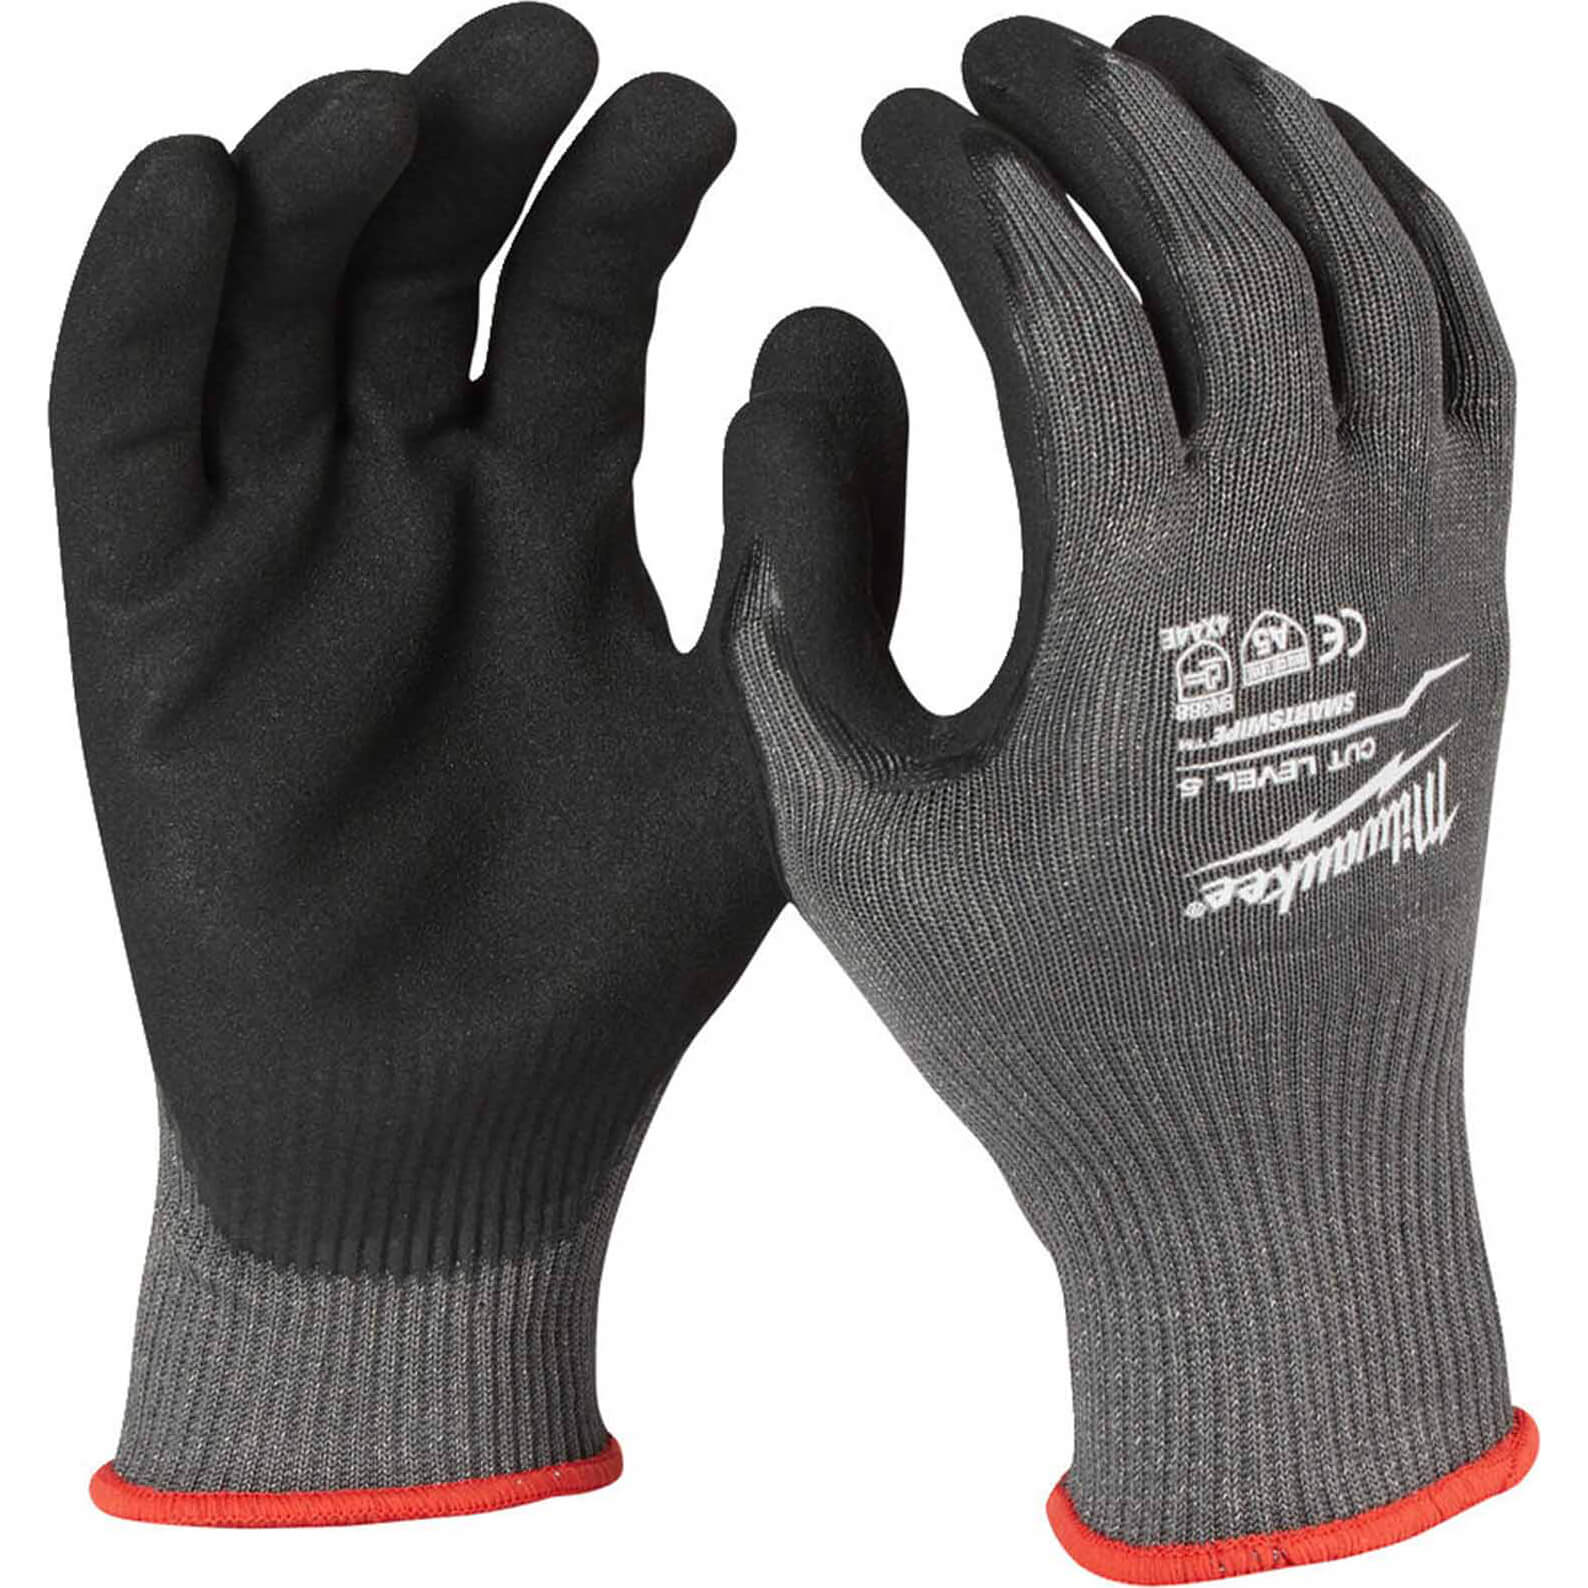 Image of Milwaukee Cut Level 5 Dipped Work Gloves Black / Grey S Pack of 144